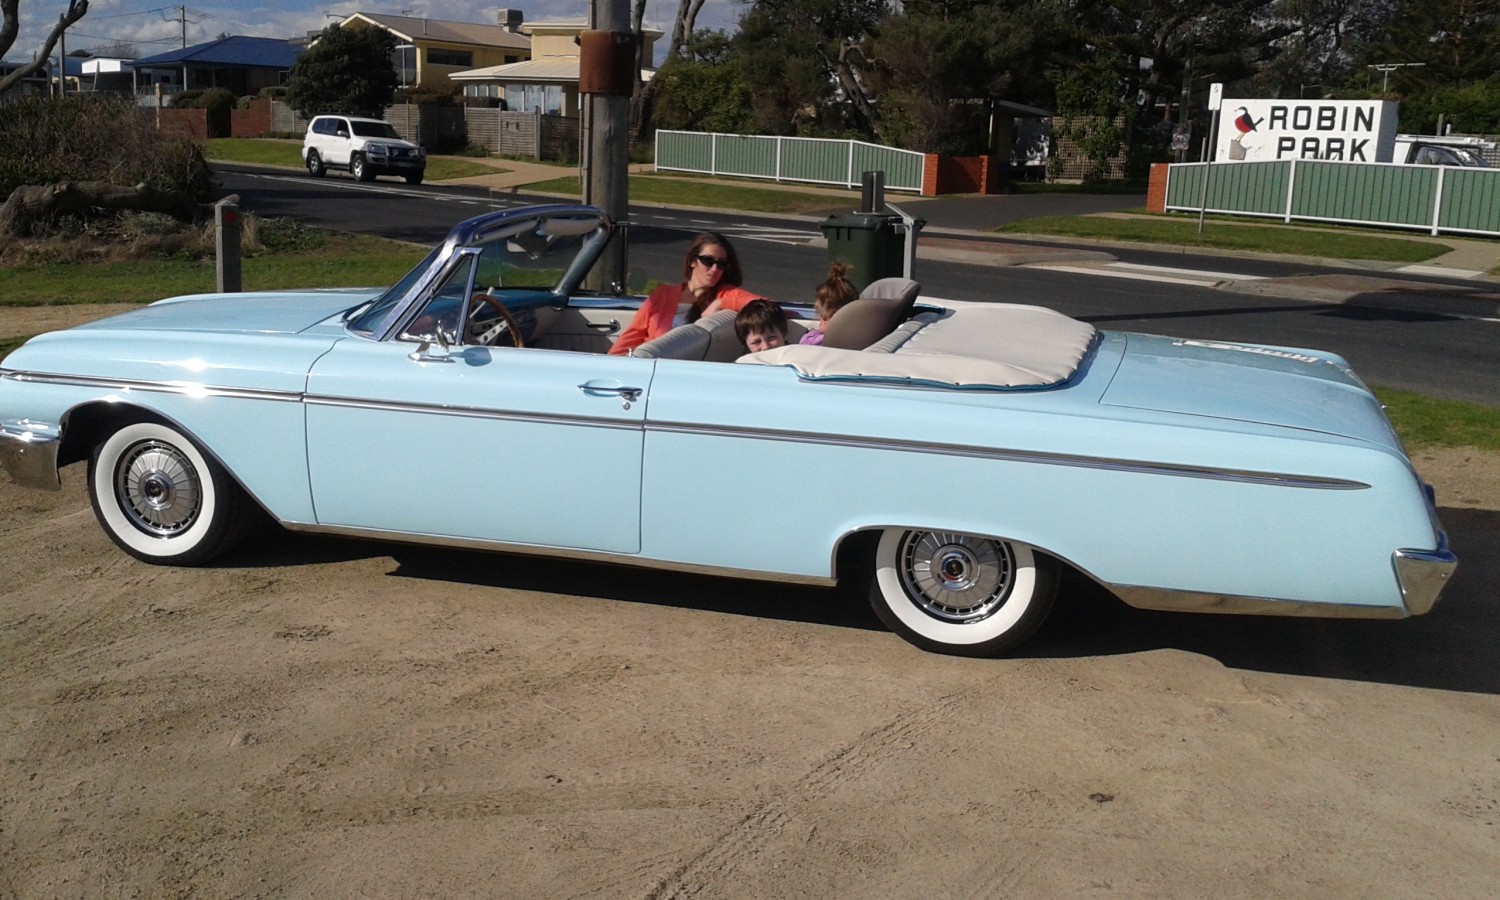 1962 Ford Galaxie 500 sunliner convertible . Mint,ado62